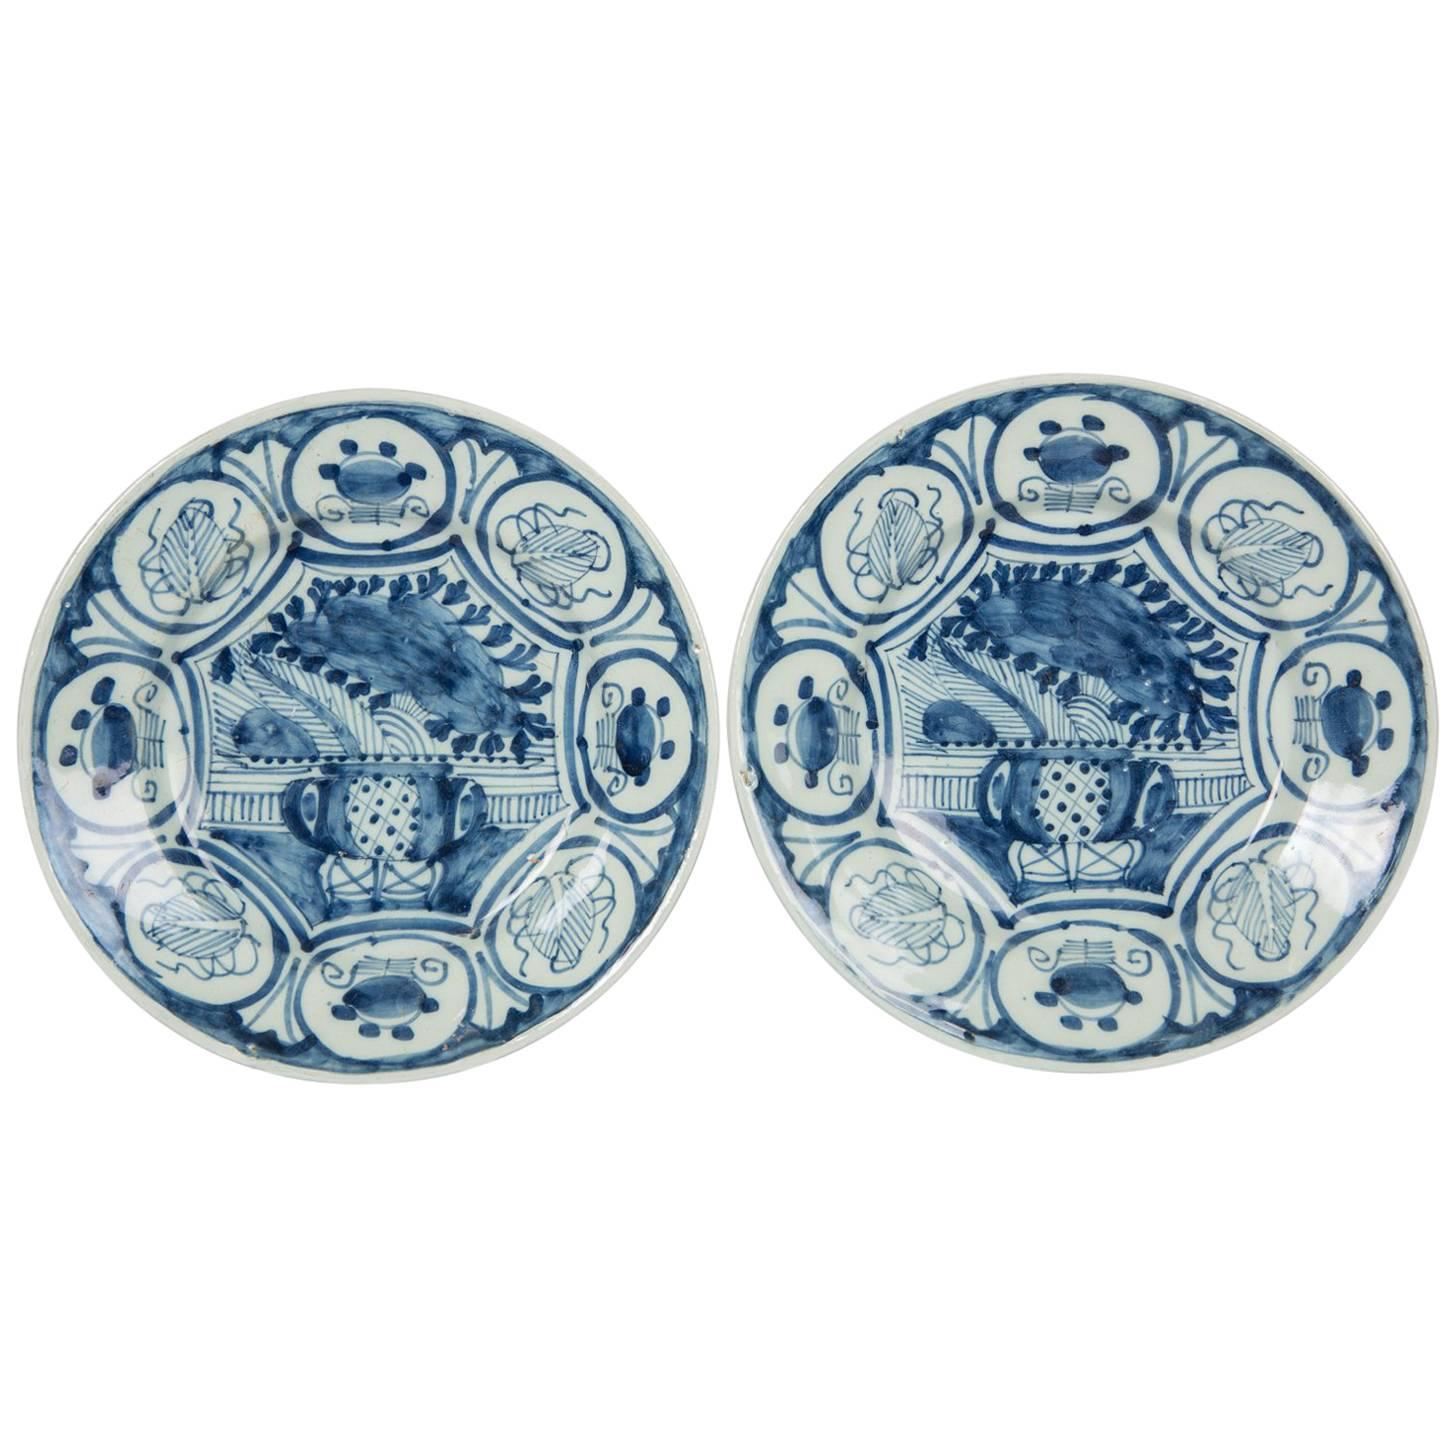  Blue and White Delft Dishes Antique Pair Made circa 1770